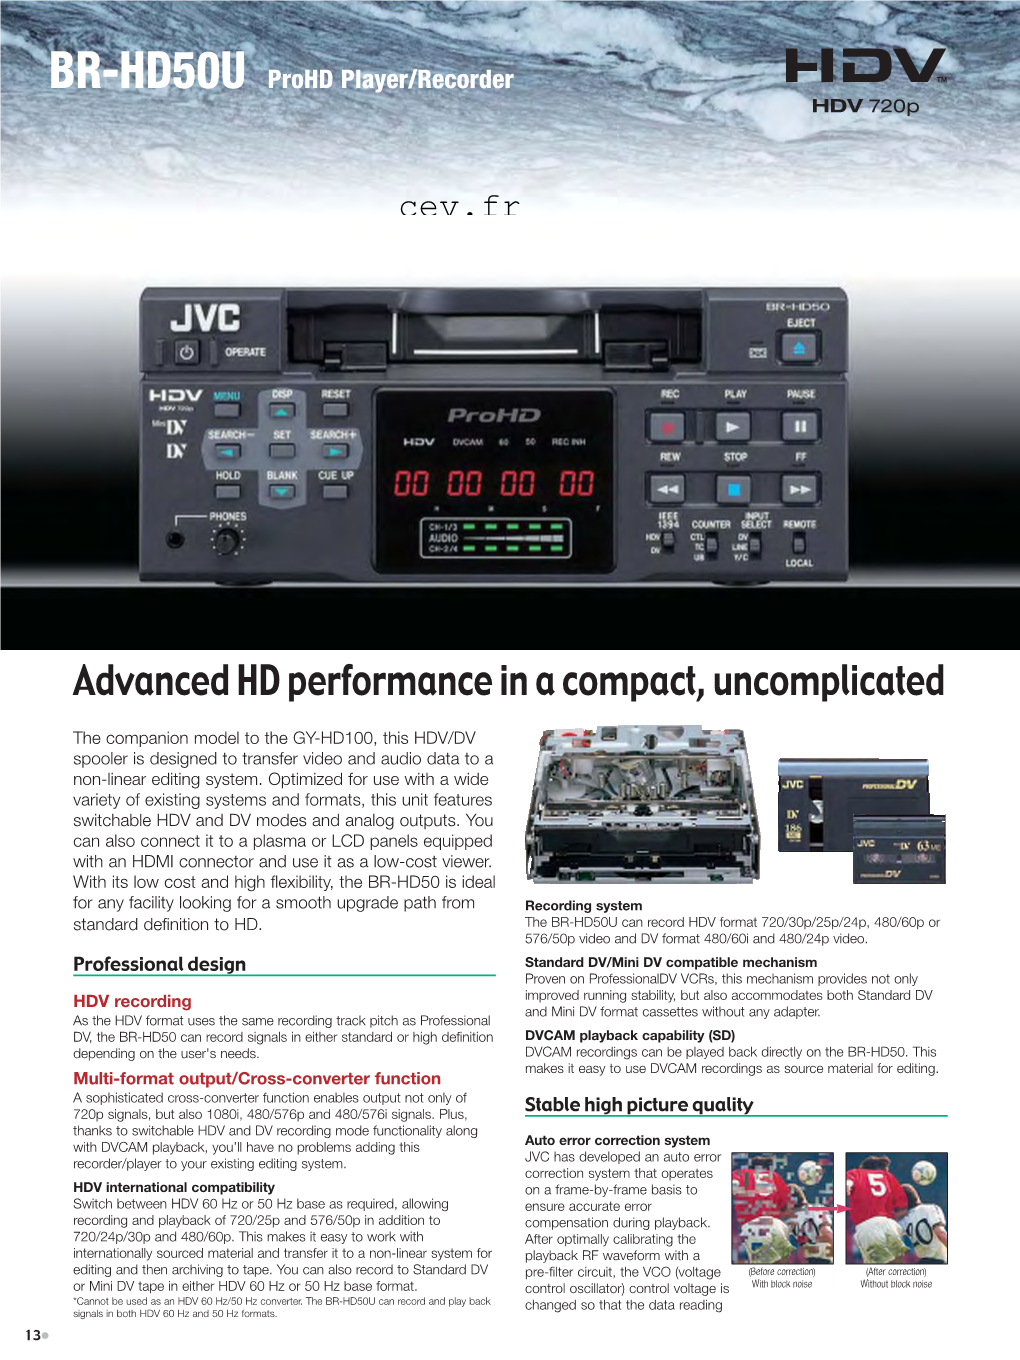 Advanced HD Performance in a Compact, Uncomplicated Reco